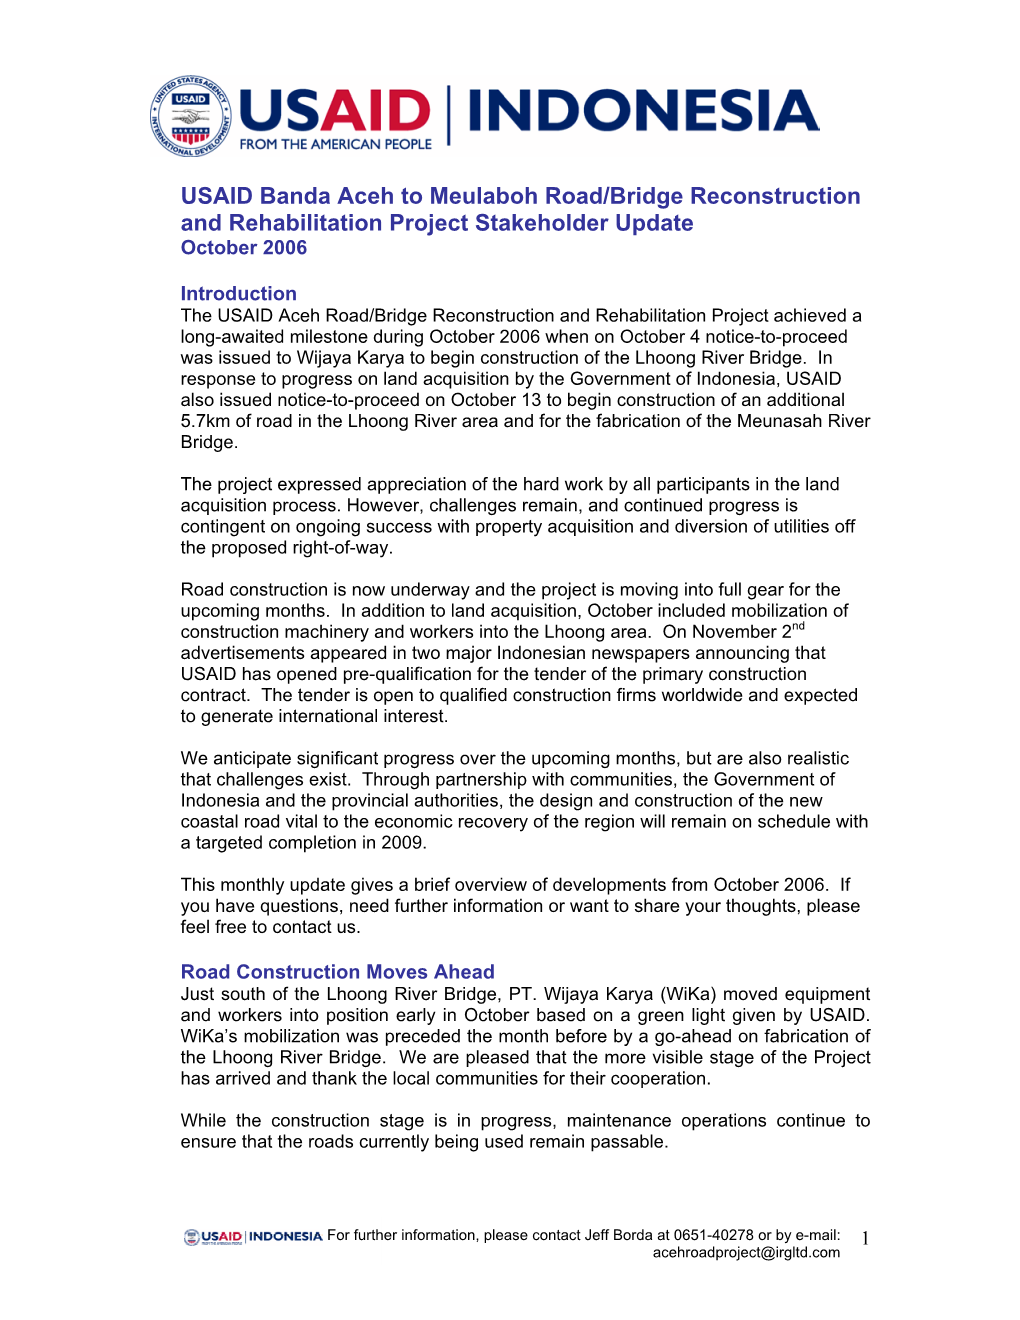 USAID Banda Aceh to Meulaboh Road/Bridge Reconstruction and Rehabilitation Project Stakeholder Update October 2006